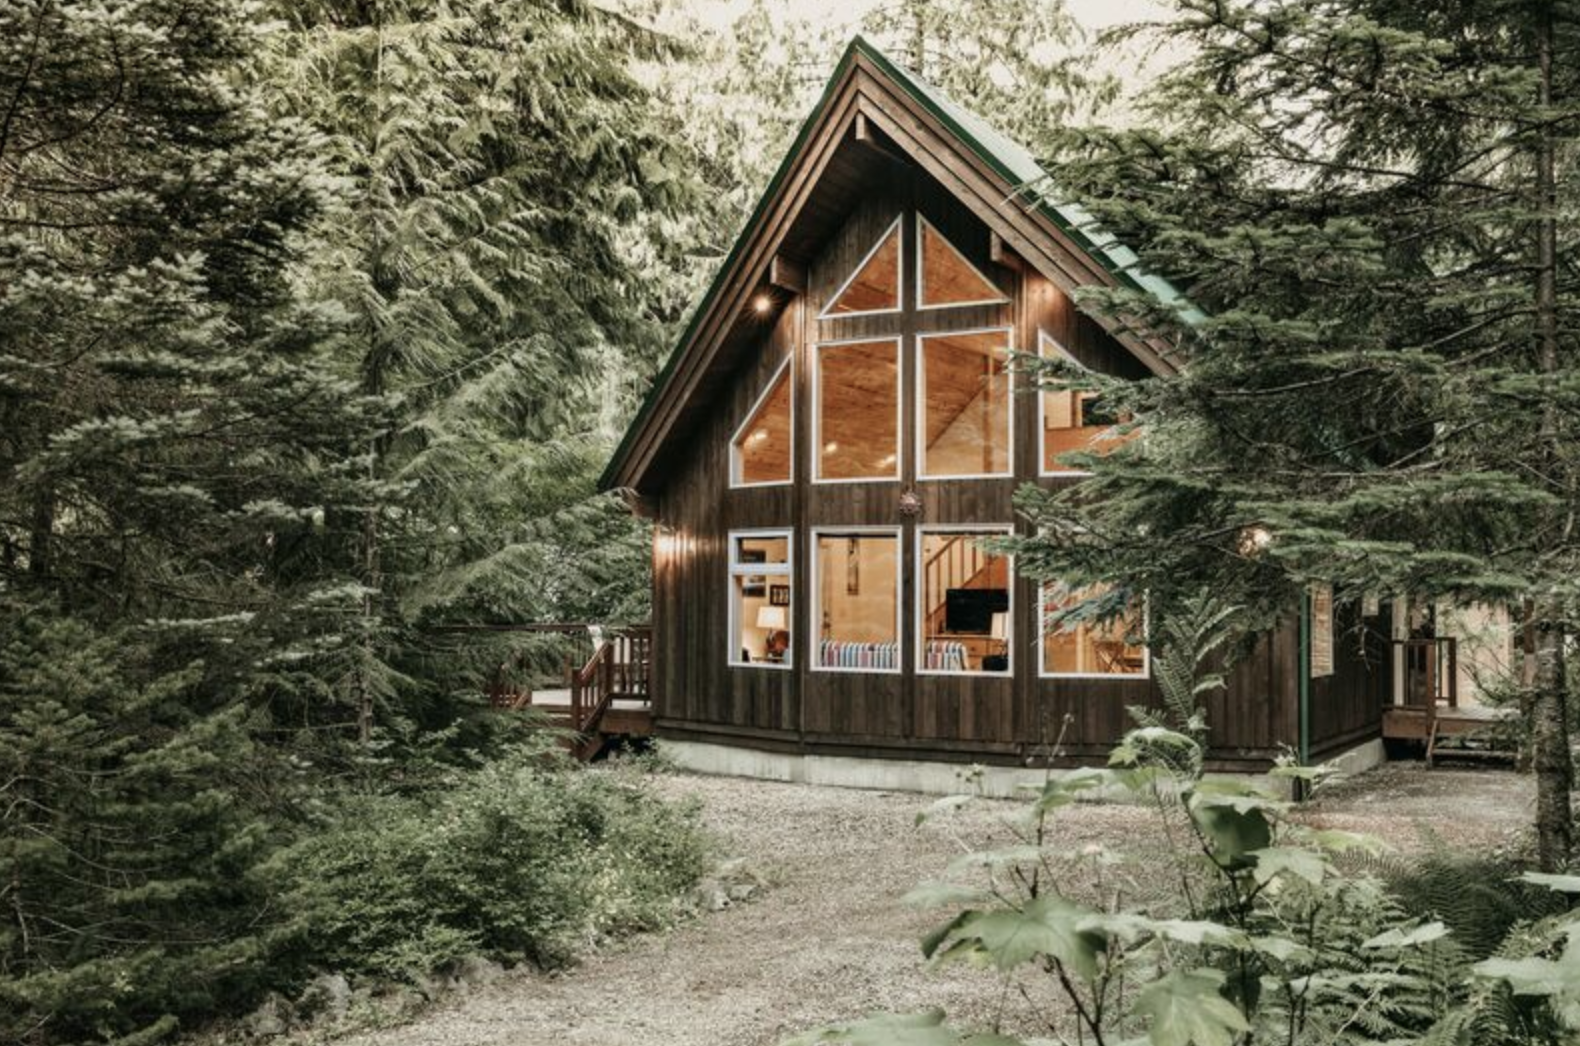 Pet Friendly Snowline Cabin #75 - The Traditional Family Chalet in Maple Falls, Washington